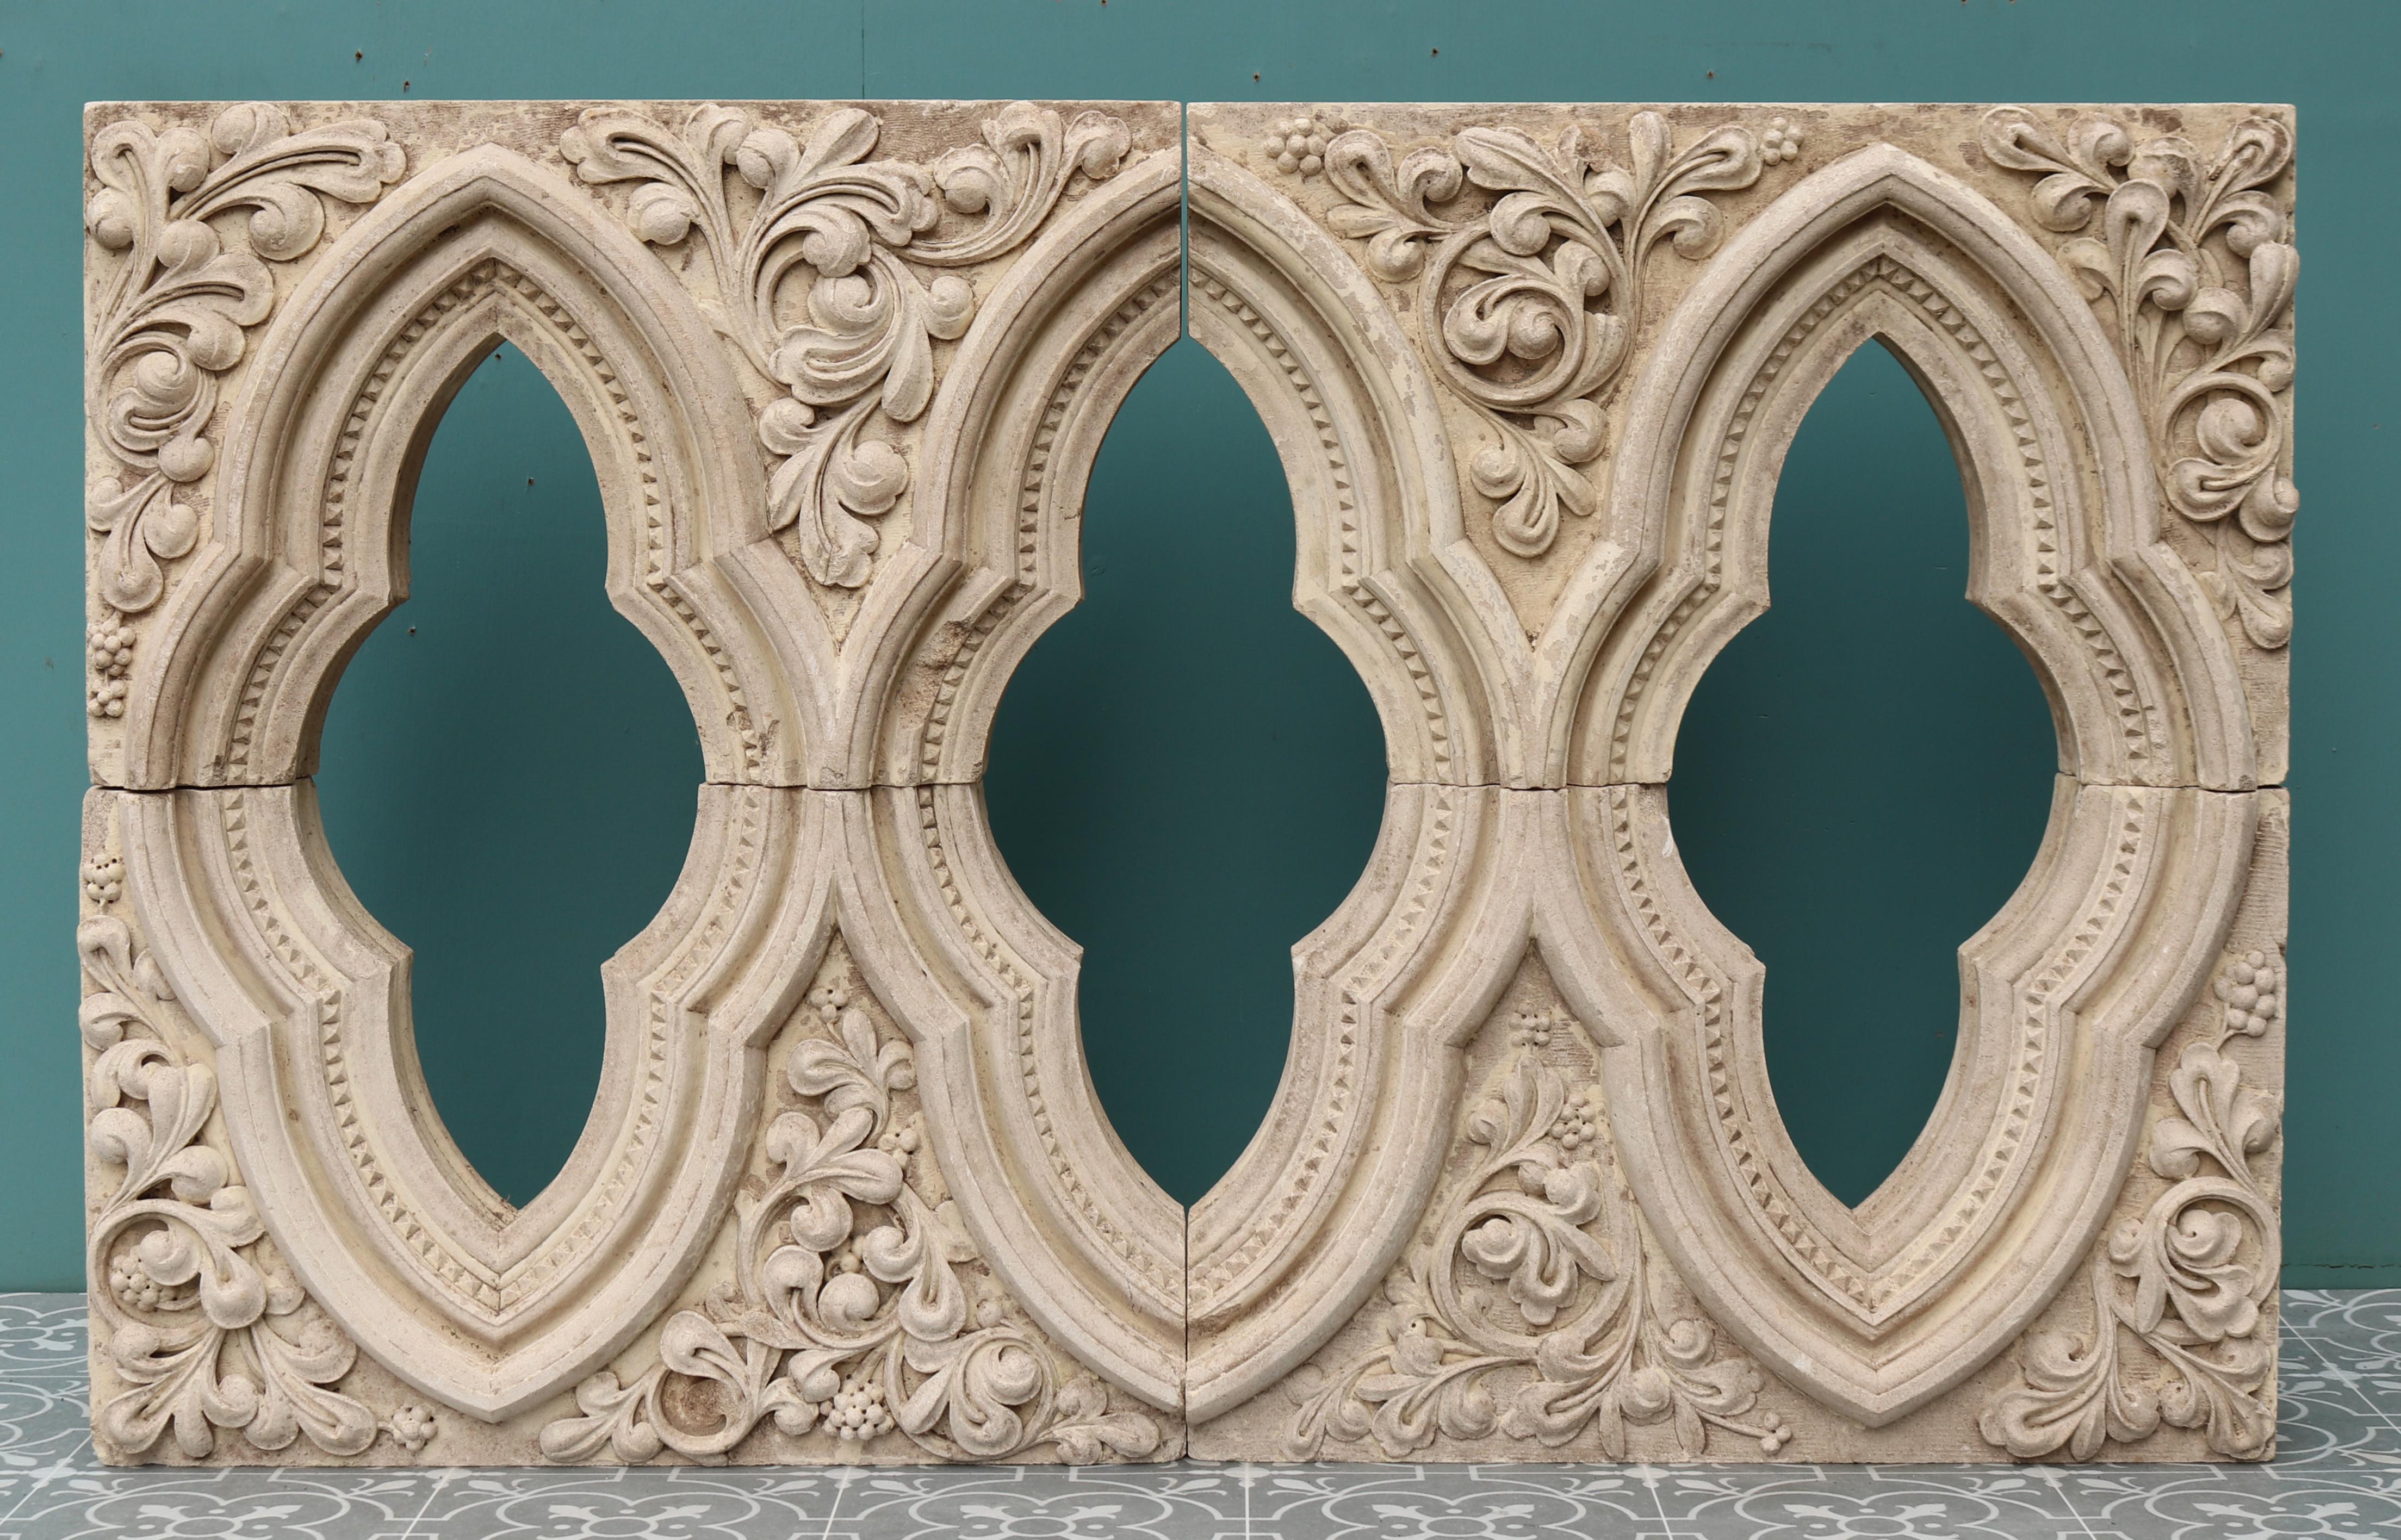 A richly carved limestone window salvaged from a church in Shropshire.